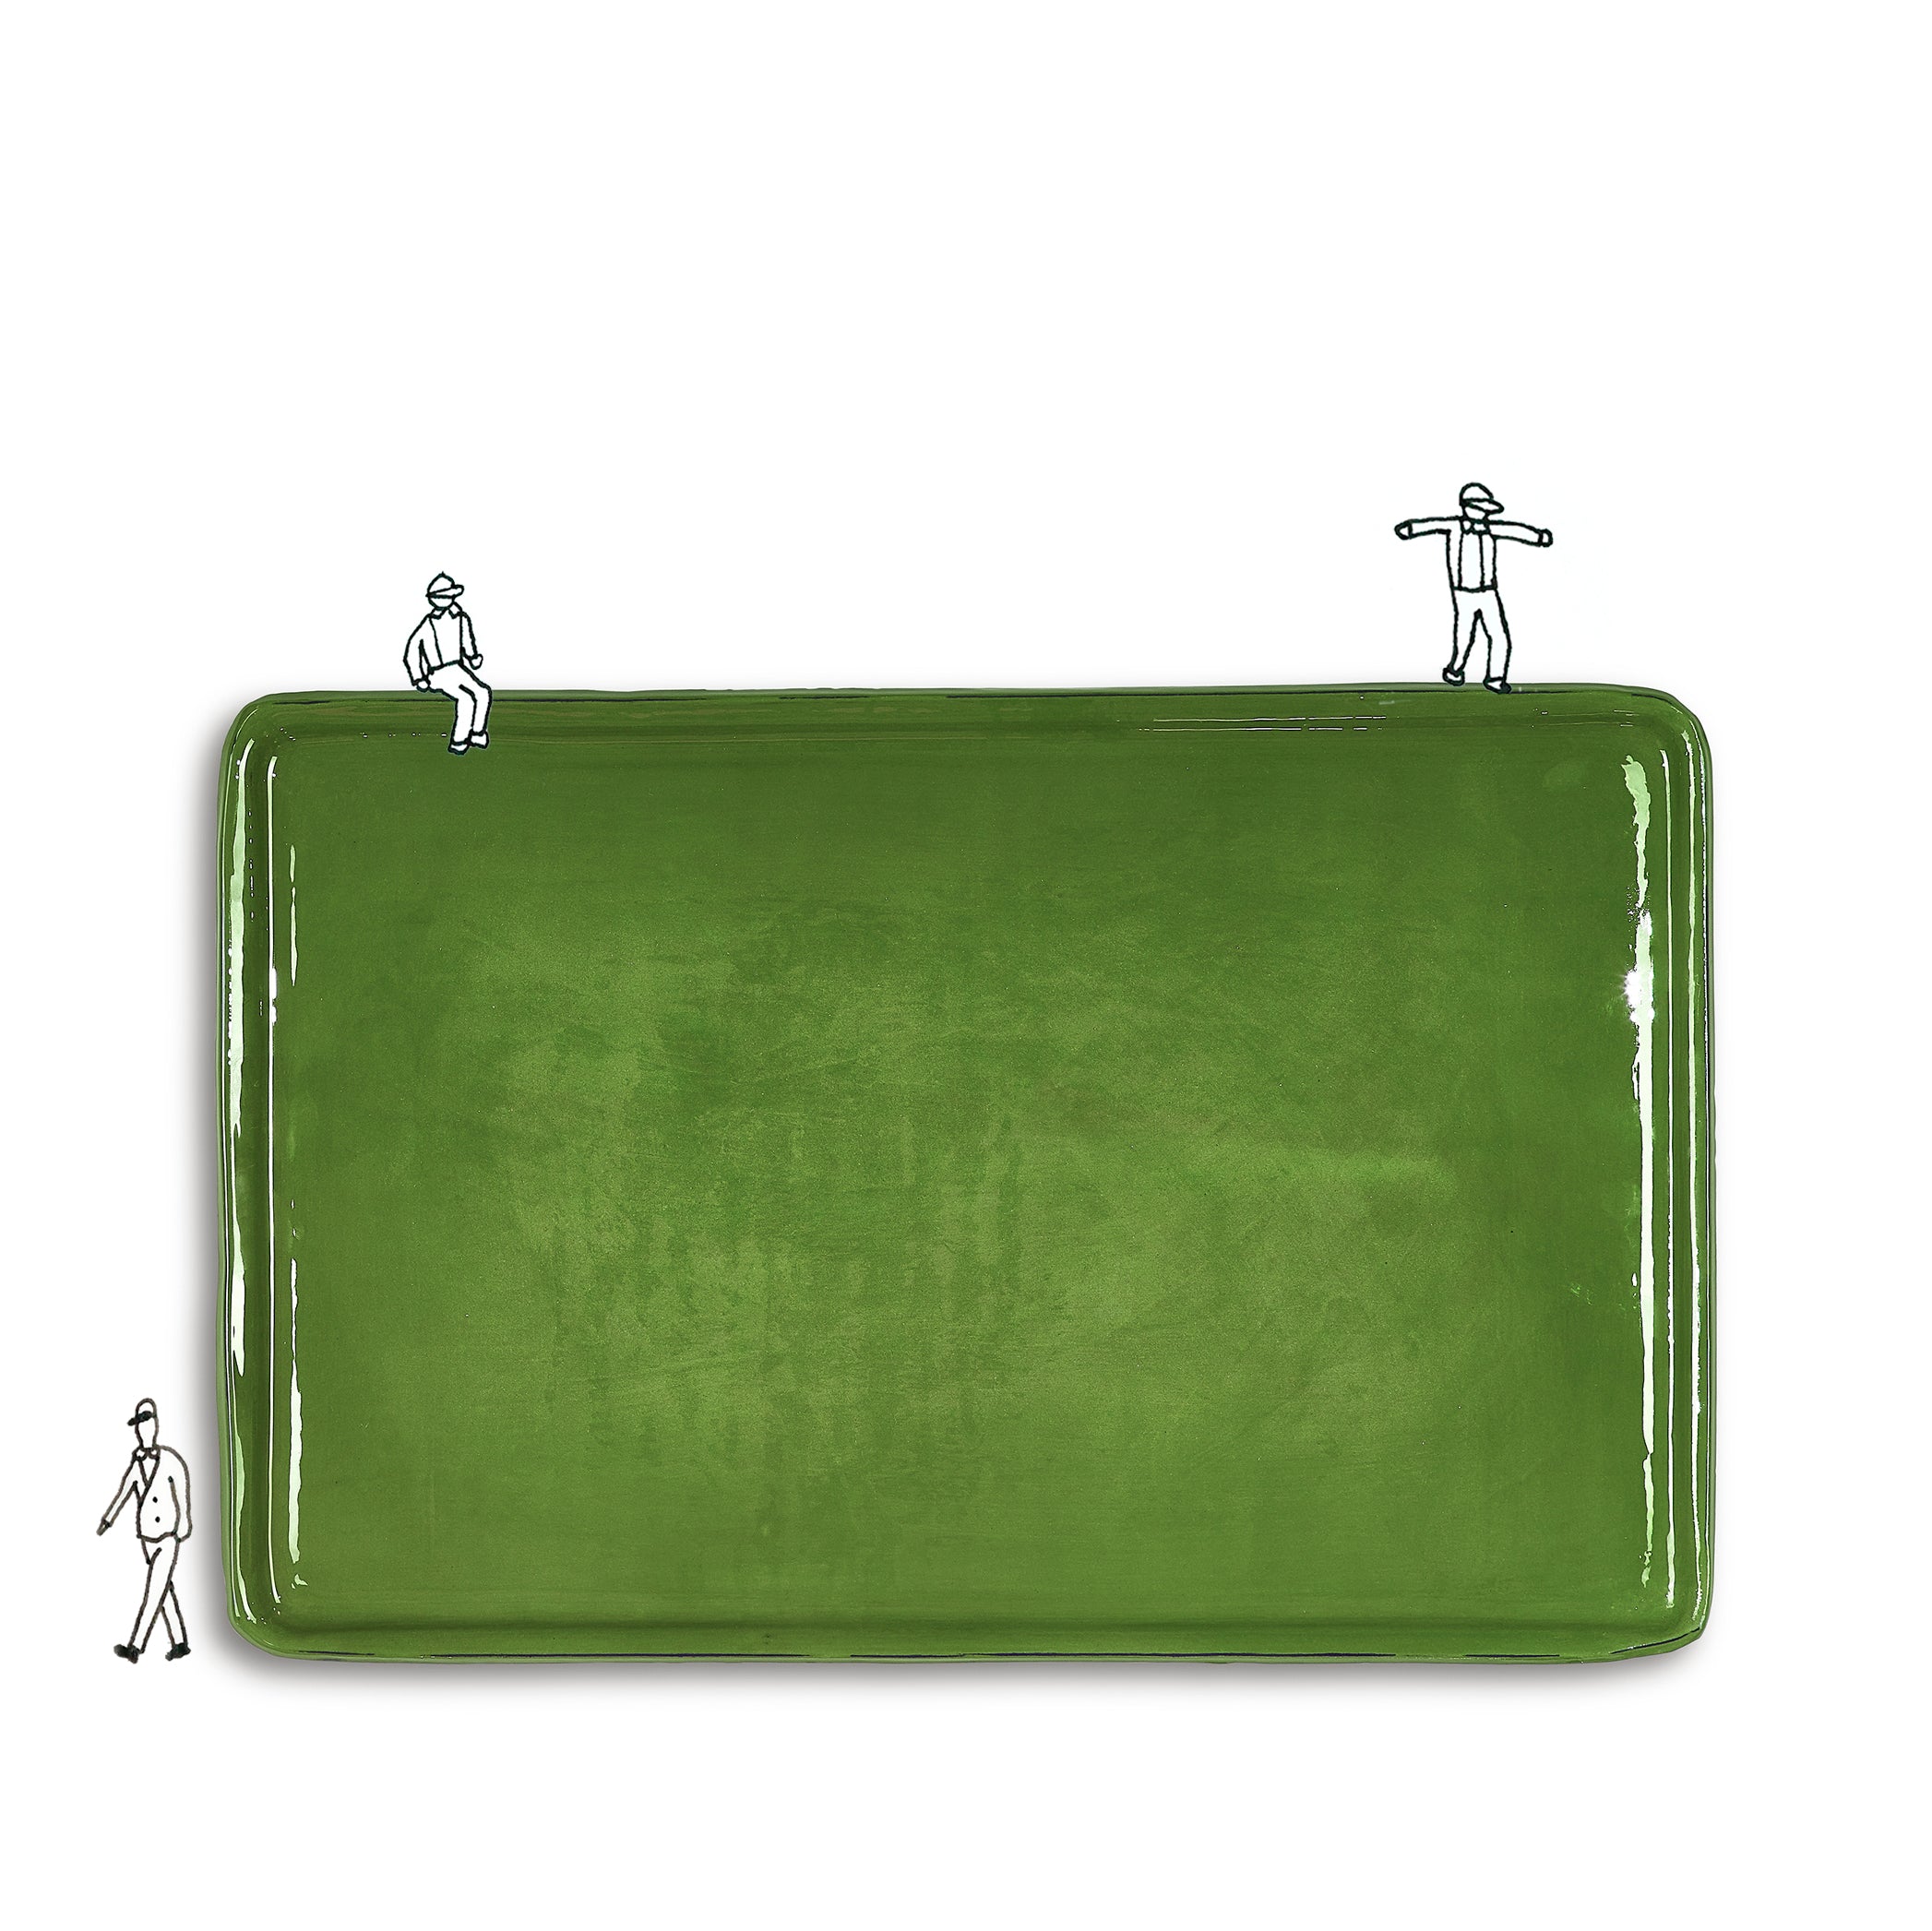 Ceramic Serving Tray in Green